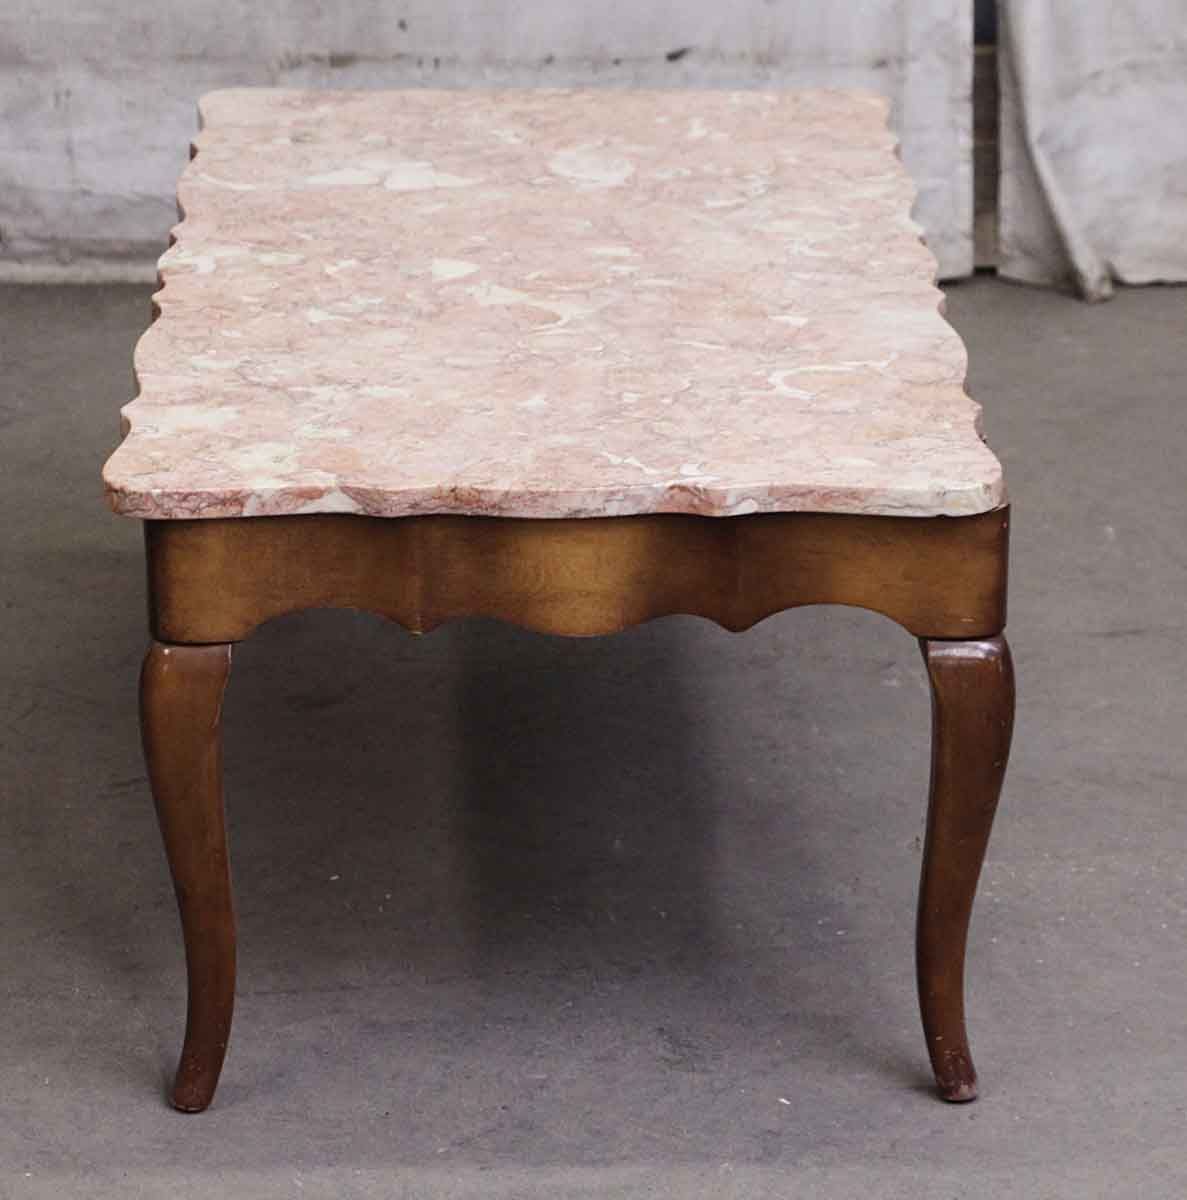 French Provincial Coffee Table With Rose Marble Top | Olde Throughout Marble Top Coffee Tables (View 8 of 15)